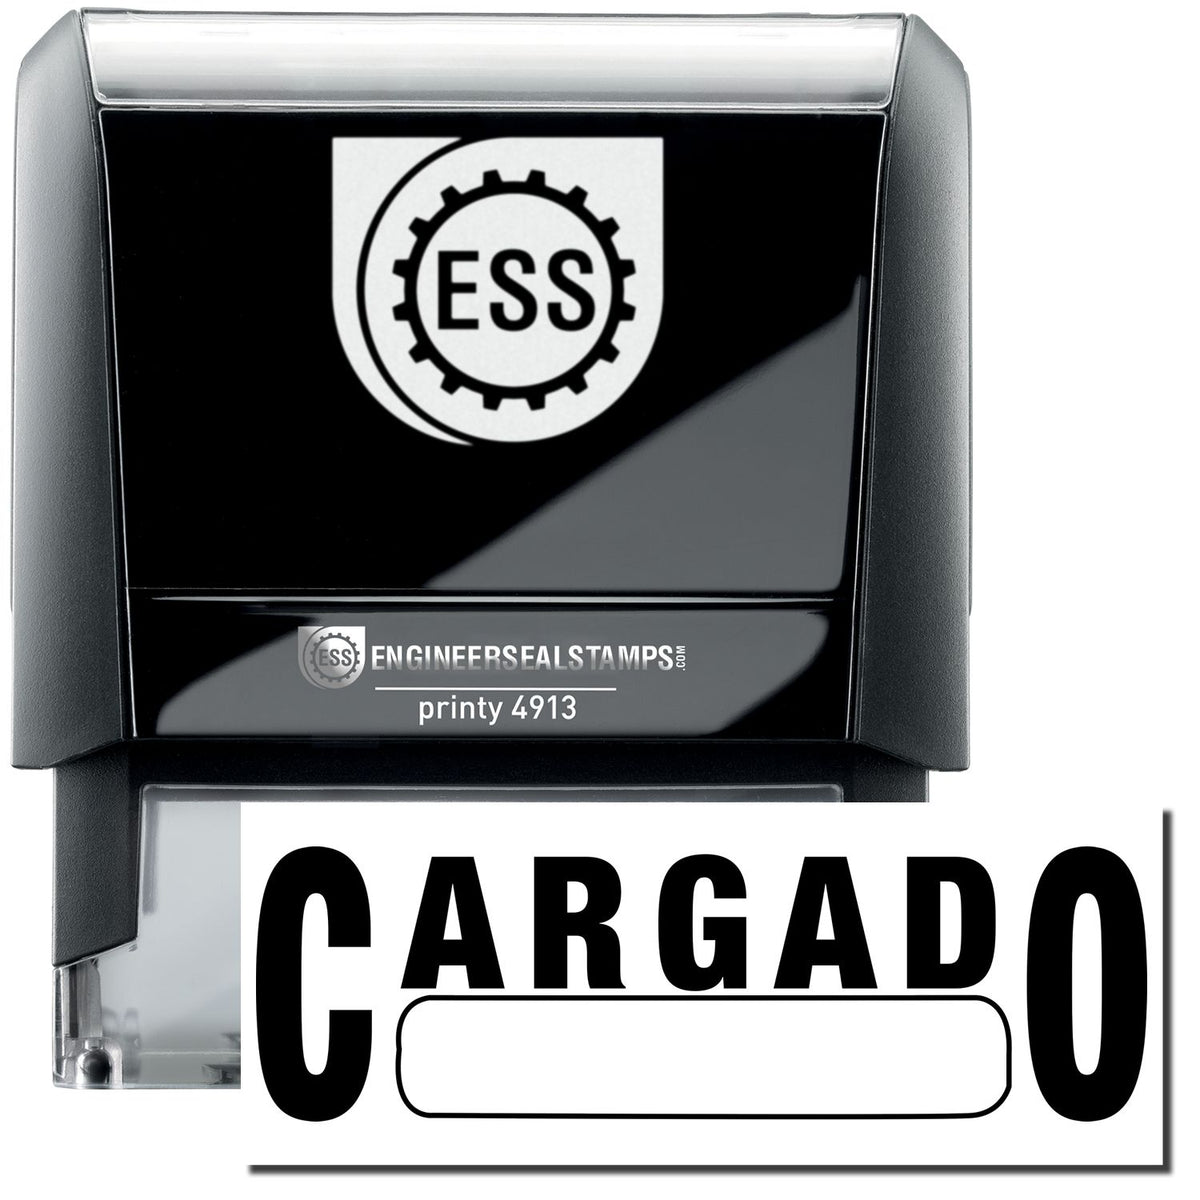 A self-inking stamp with a stamped image showing how the text &quot;CARGADO&quot; (with a box underneath) in a large font is displayed by it after stamping.